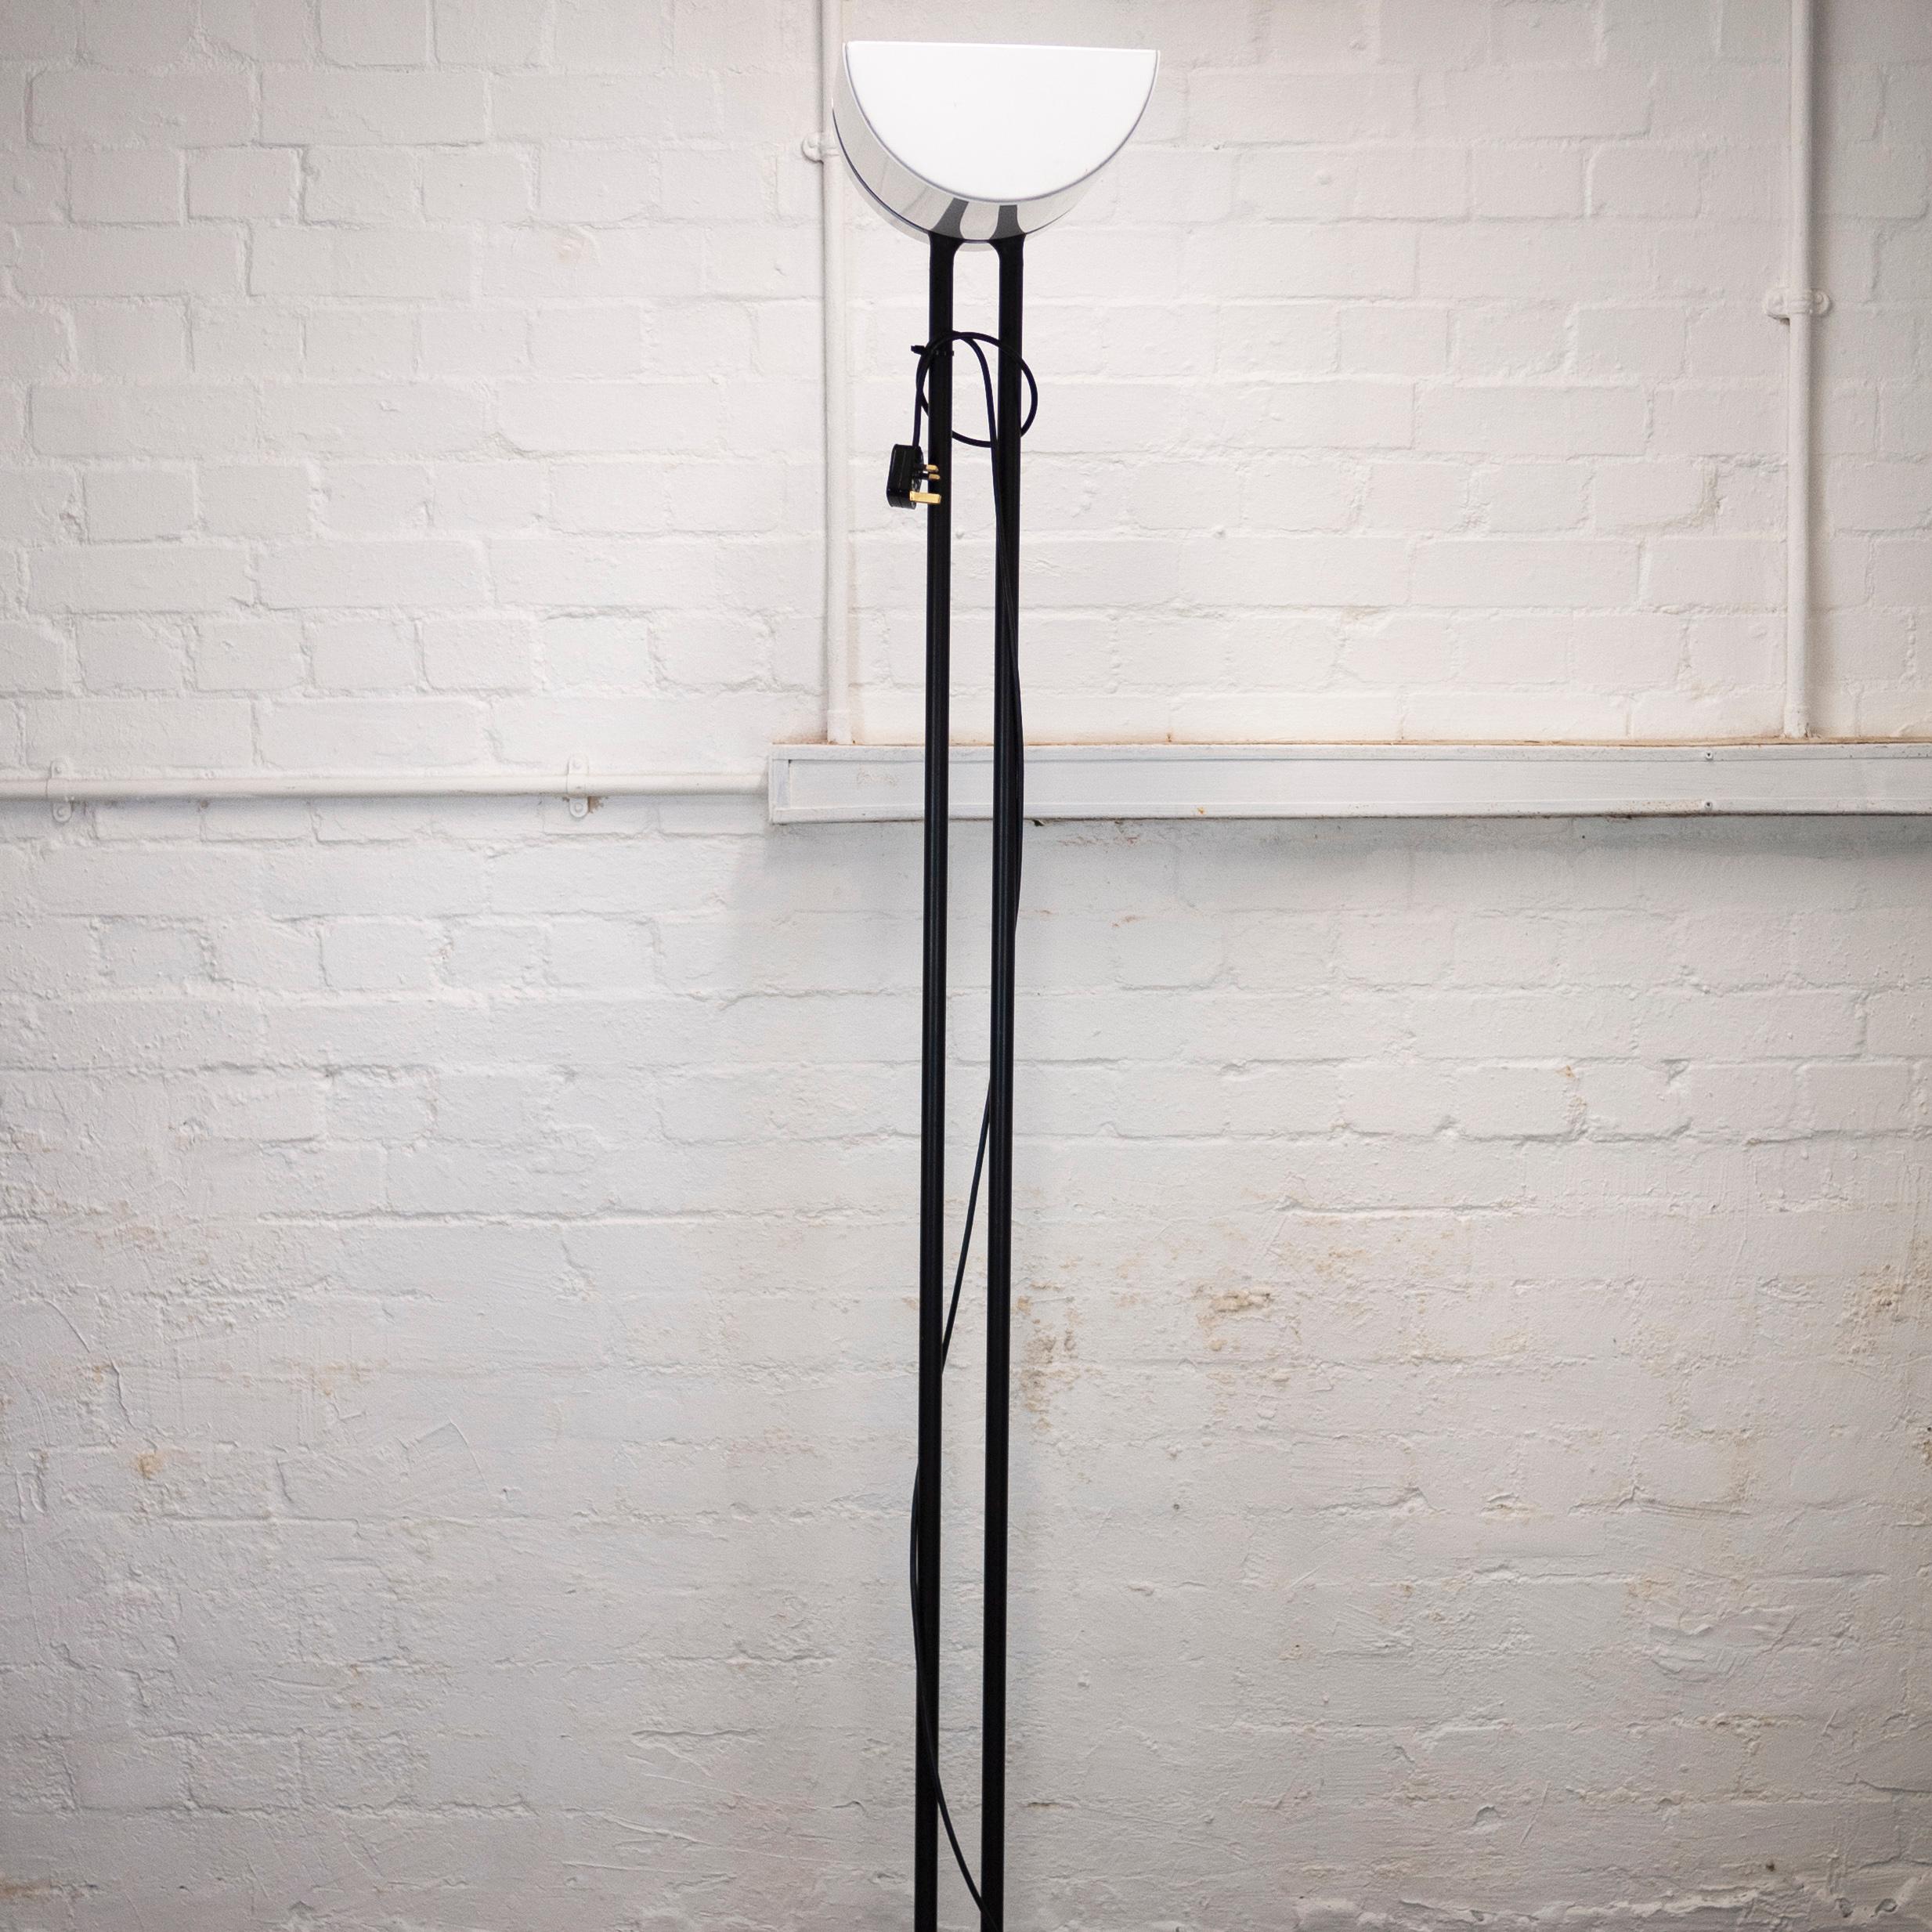 Vintage Black and White Double Stem Factory Floor Lamp, 1980s For Sale 2